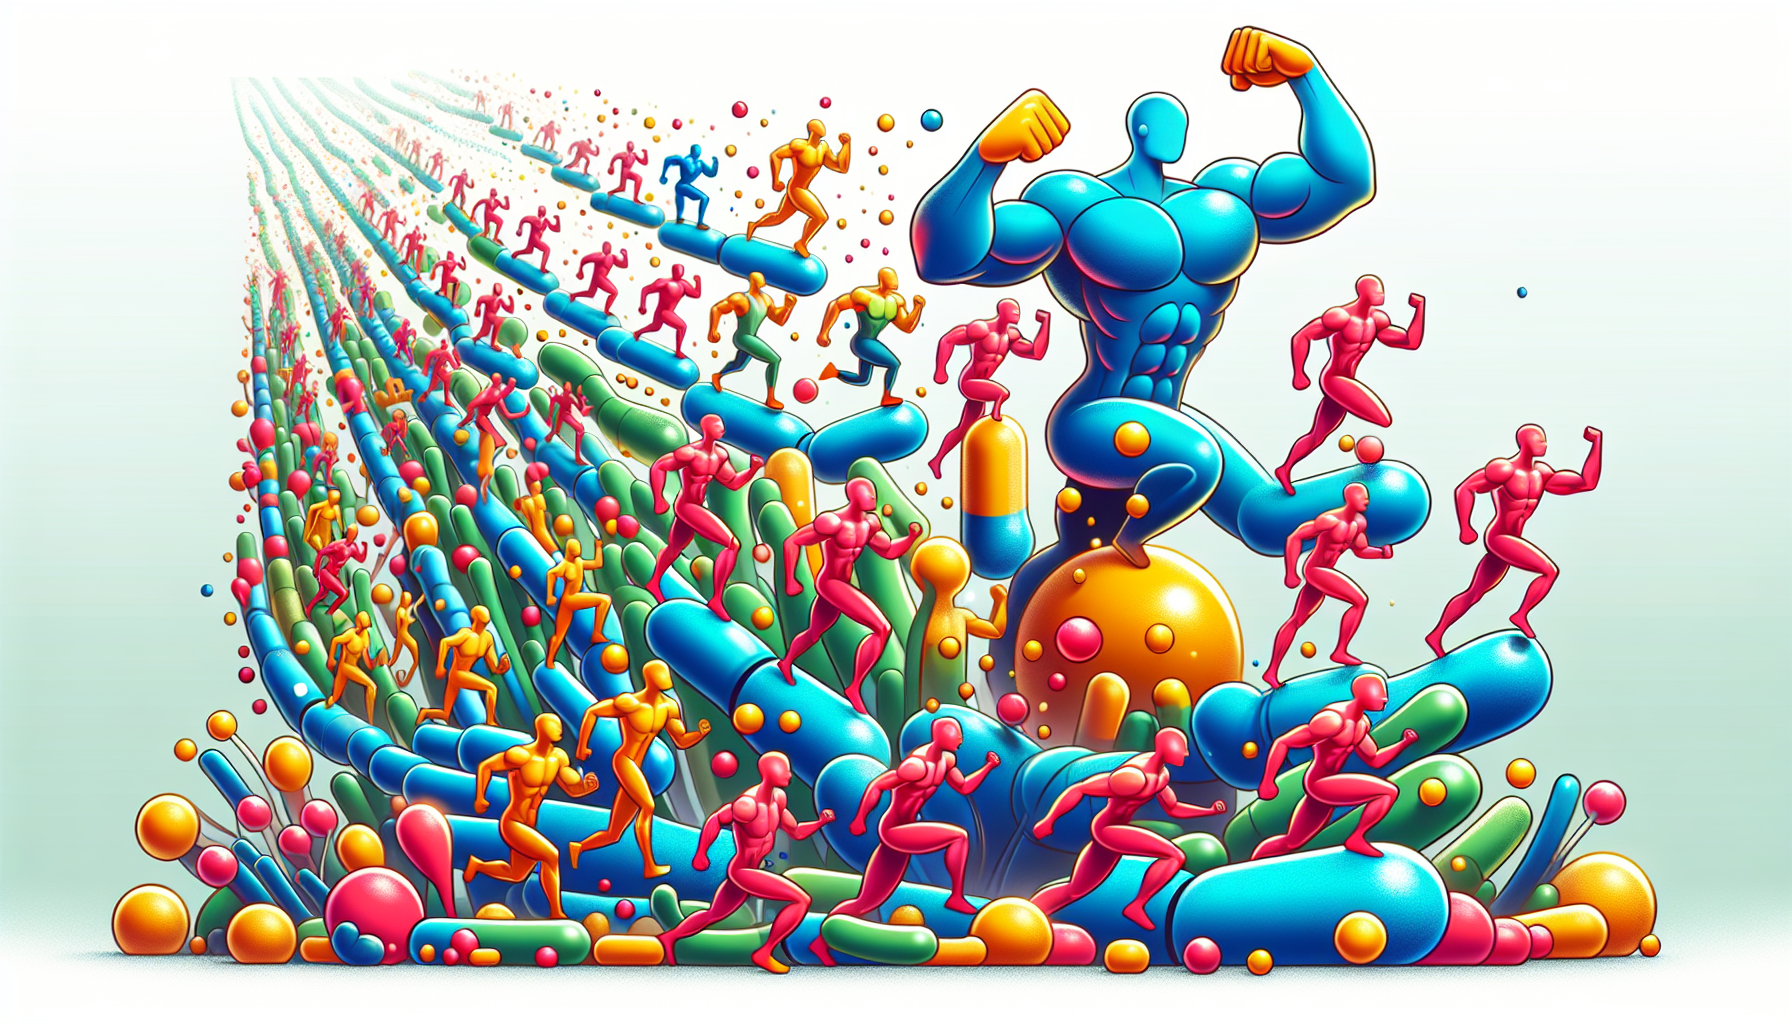 Illustration of amino acids and muscle support